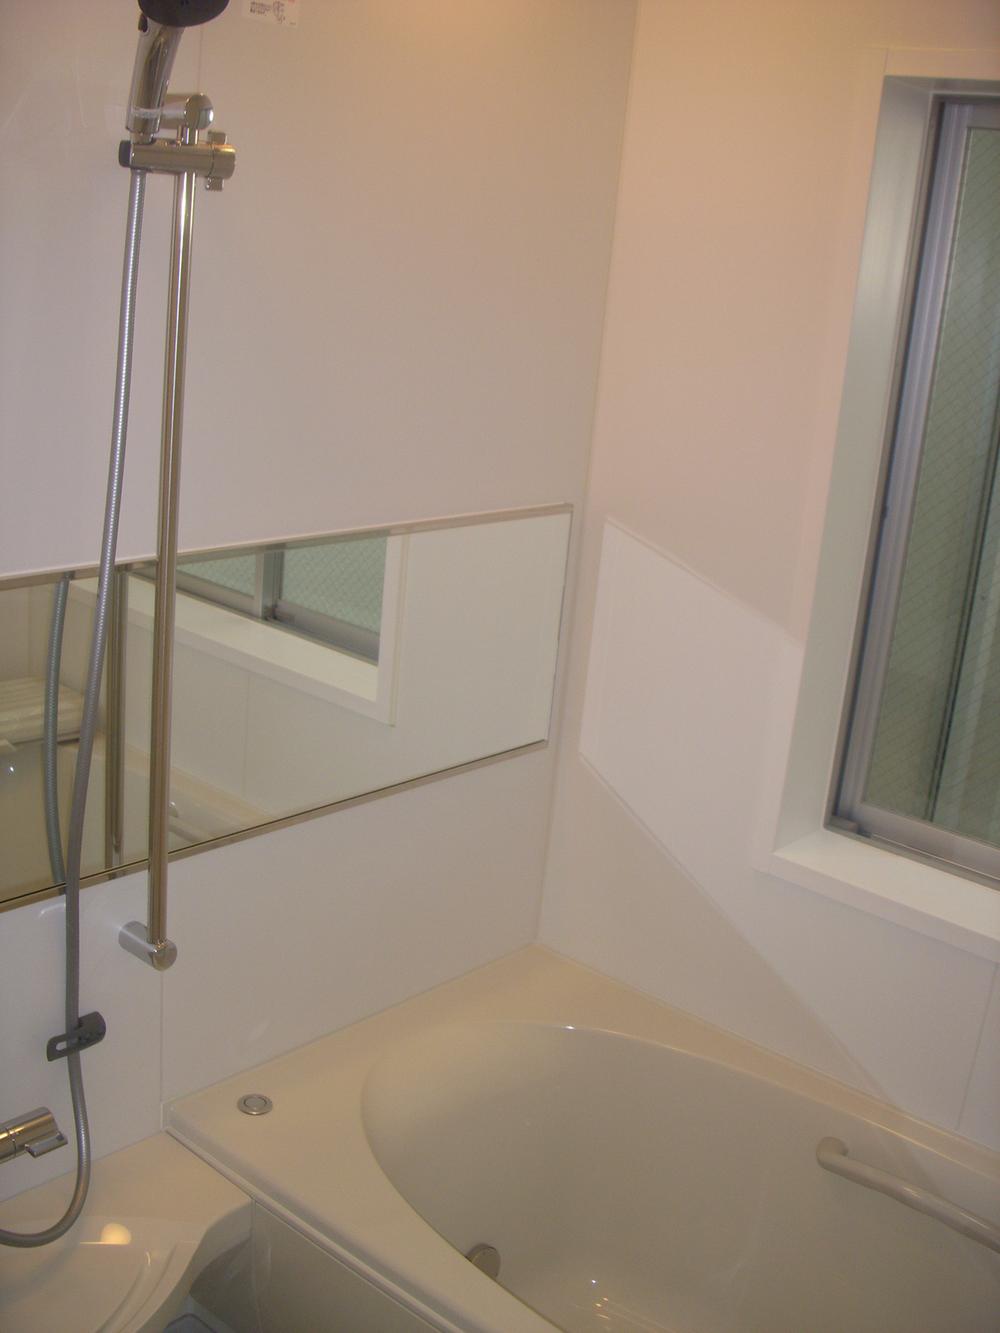 Same specifications photo (bathroom). It will be in the same specification